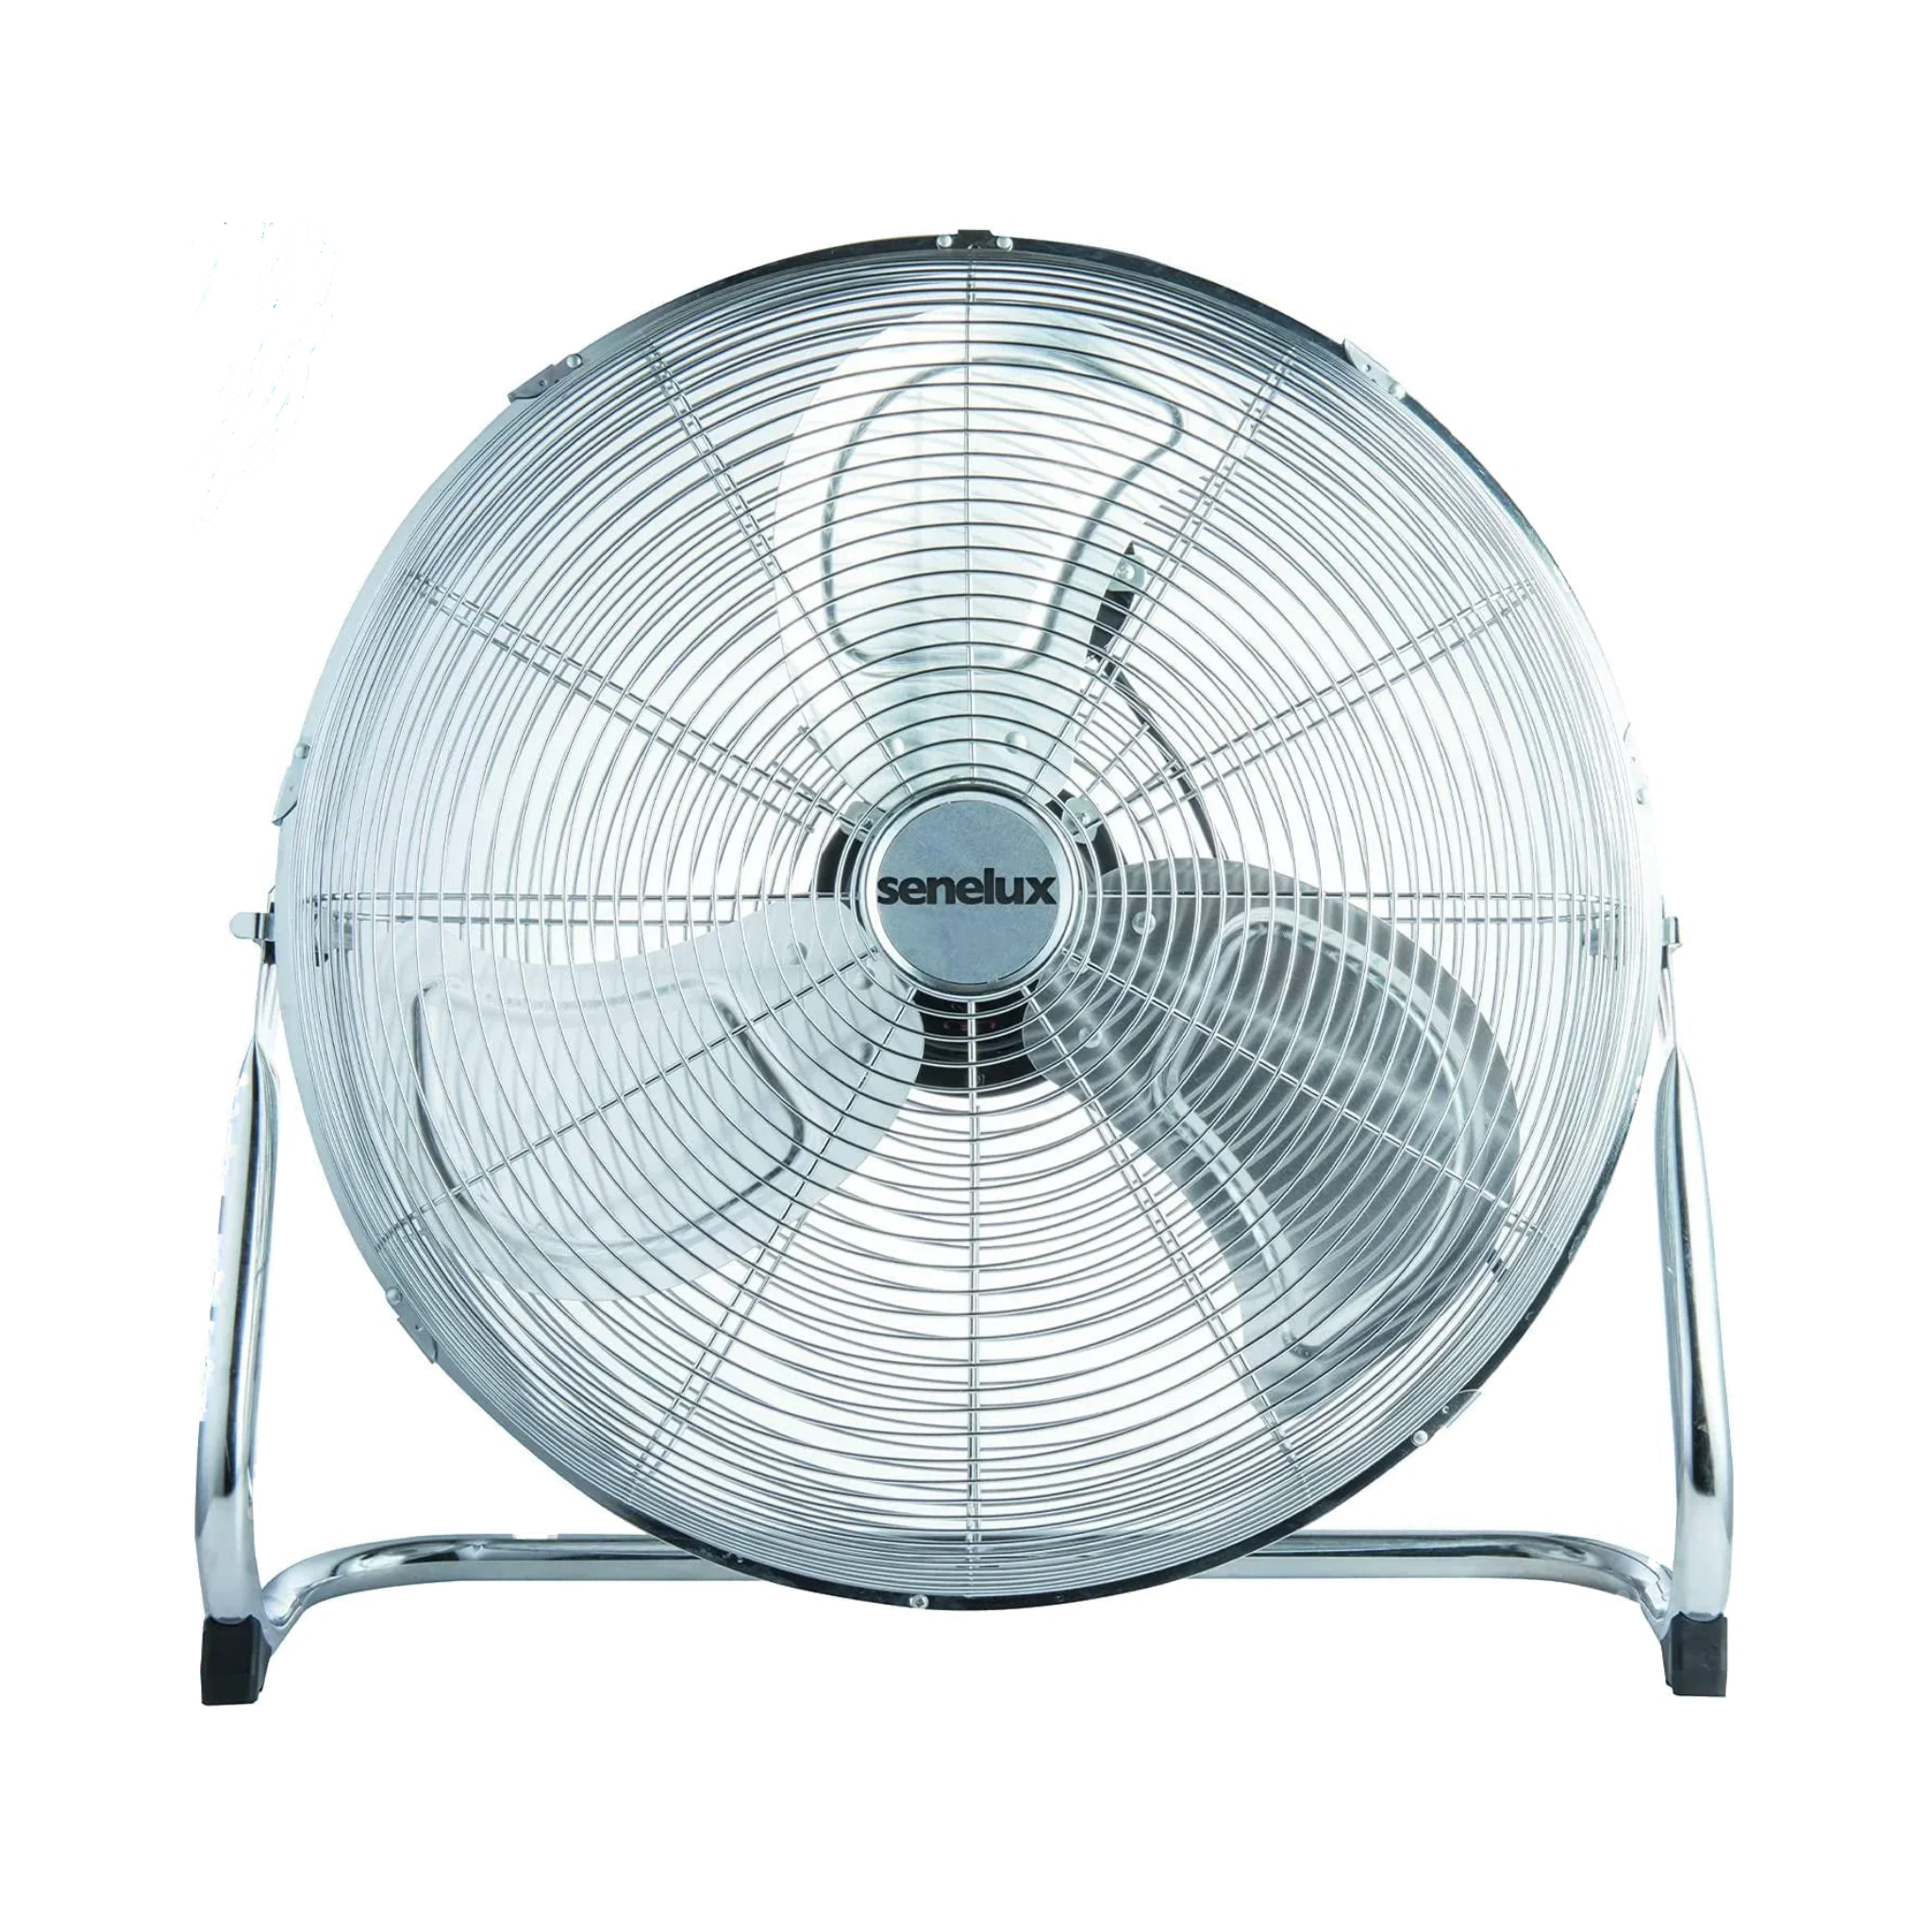 A classic chrome floor fan with a polished, clean body and three shiny blades with the Senelux logo in the middle.